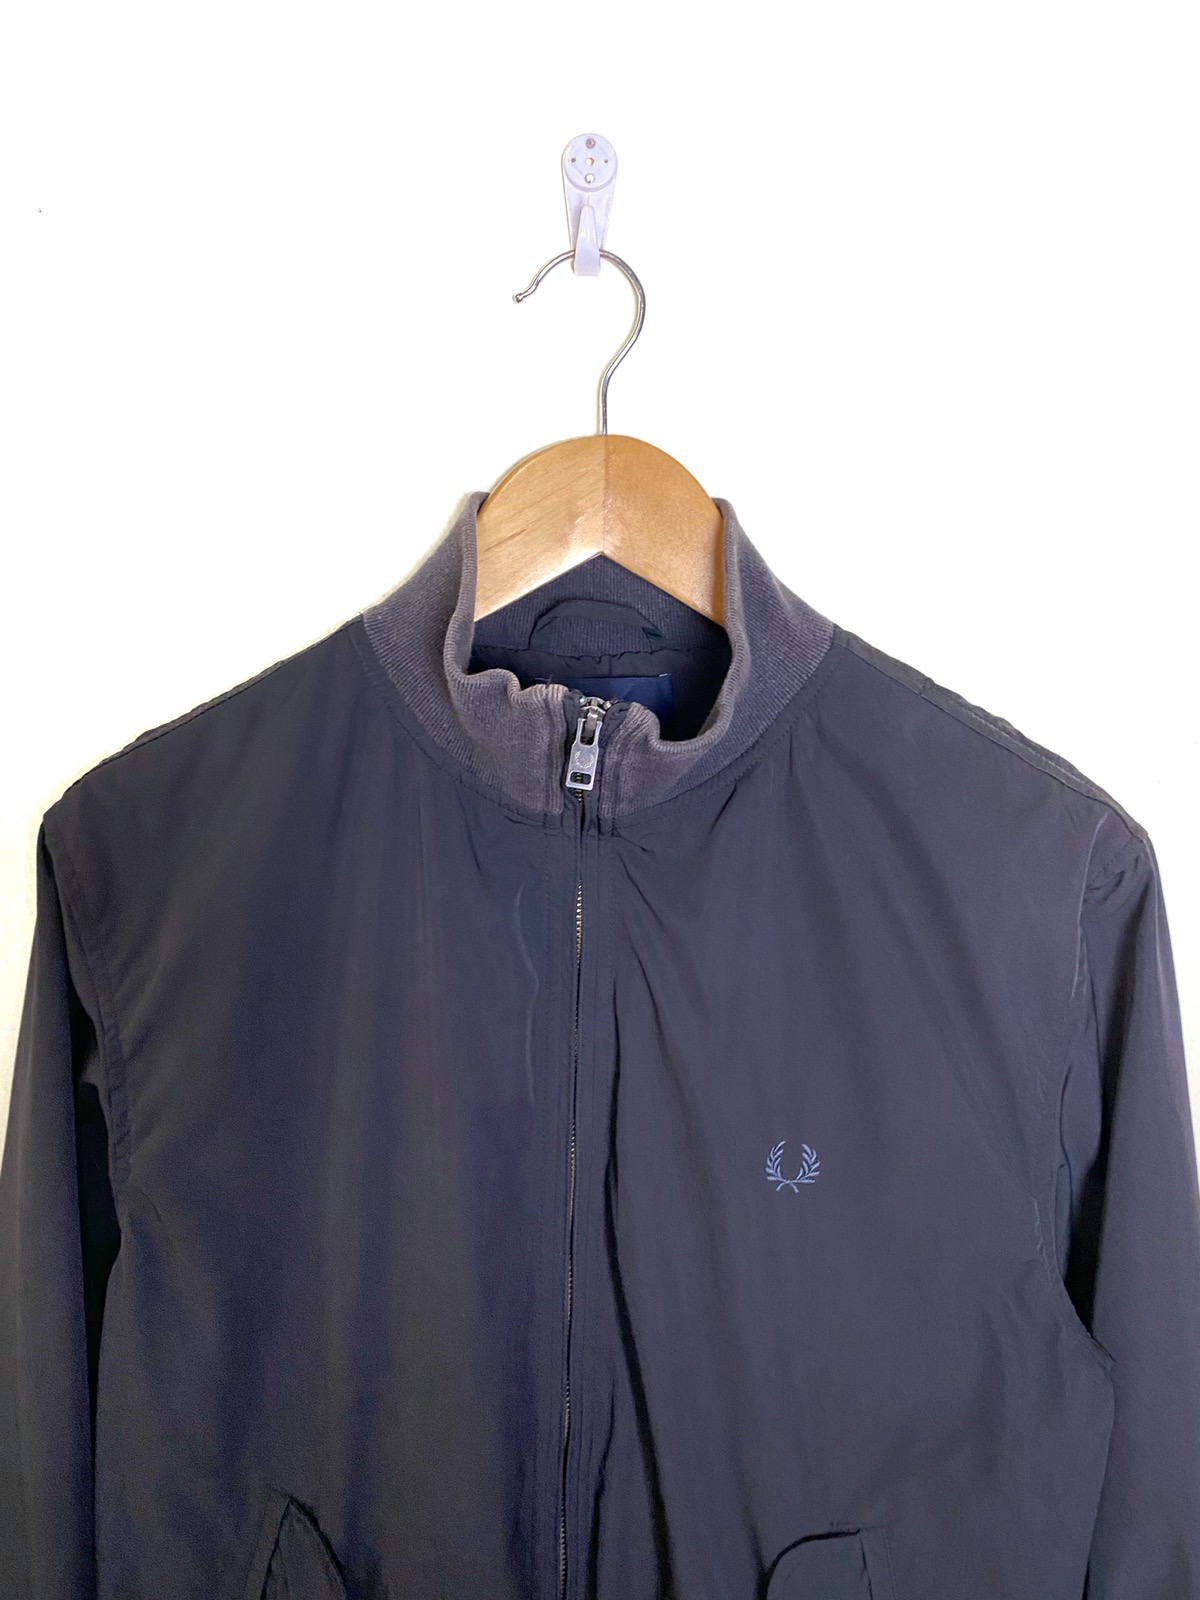 Fred Perry Zipper Jacket Coat Casual - 2